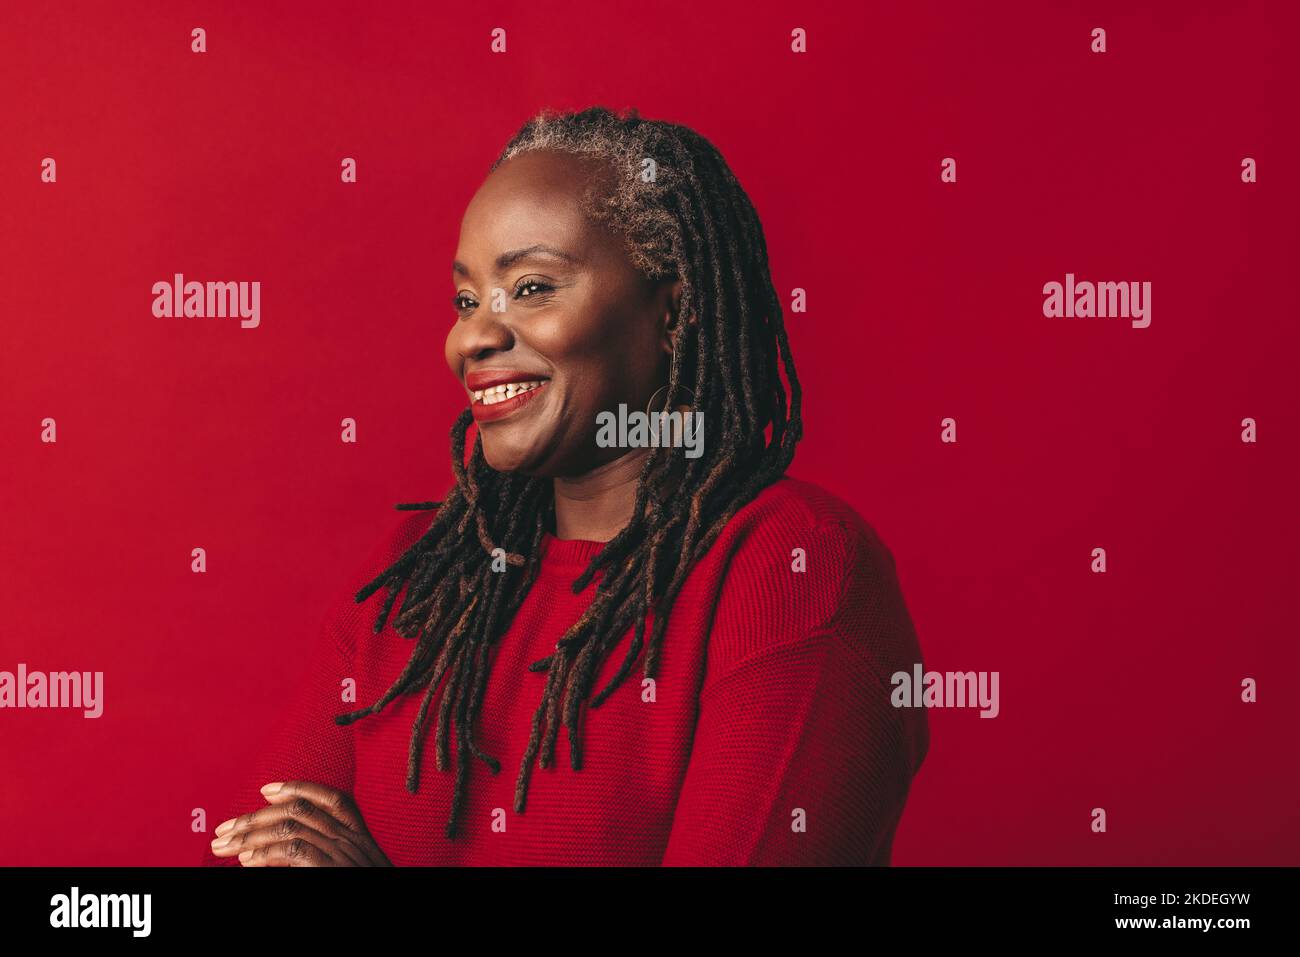 Cheerful black woman smiling and looking away while standing against a red background. Happy mature woman embracing her natural hair with confidence. Stock Photo